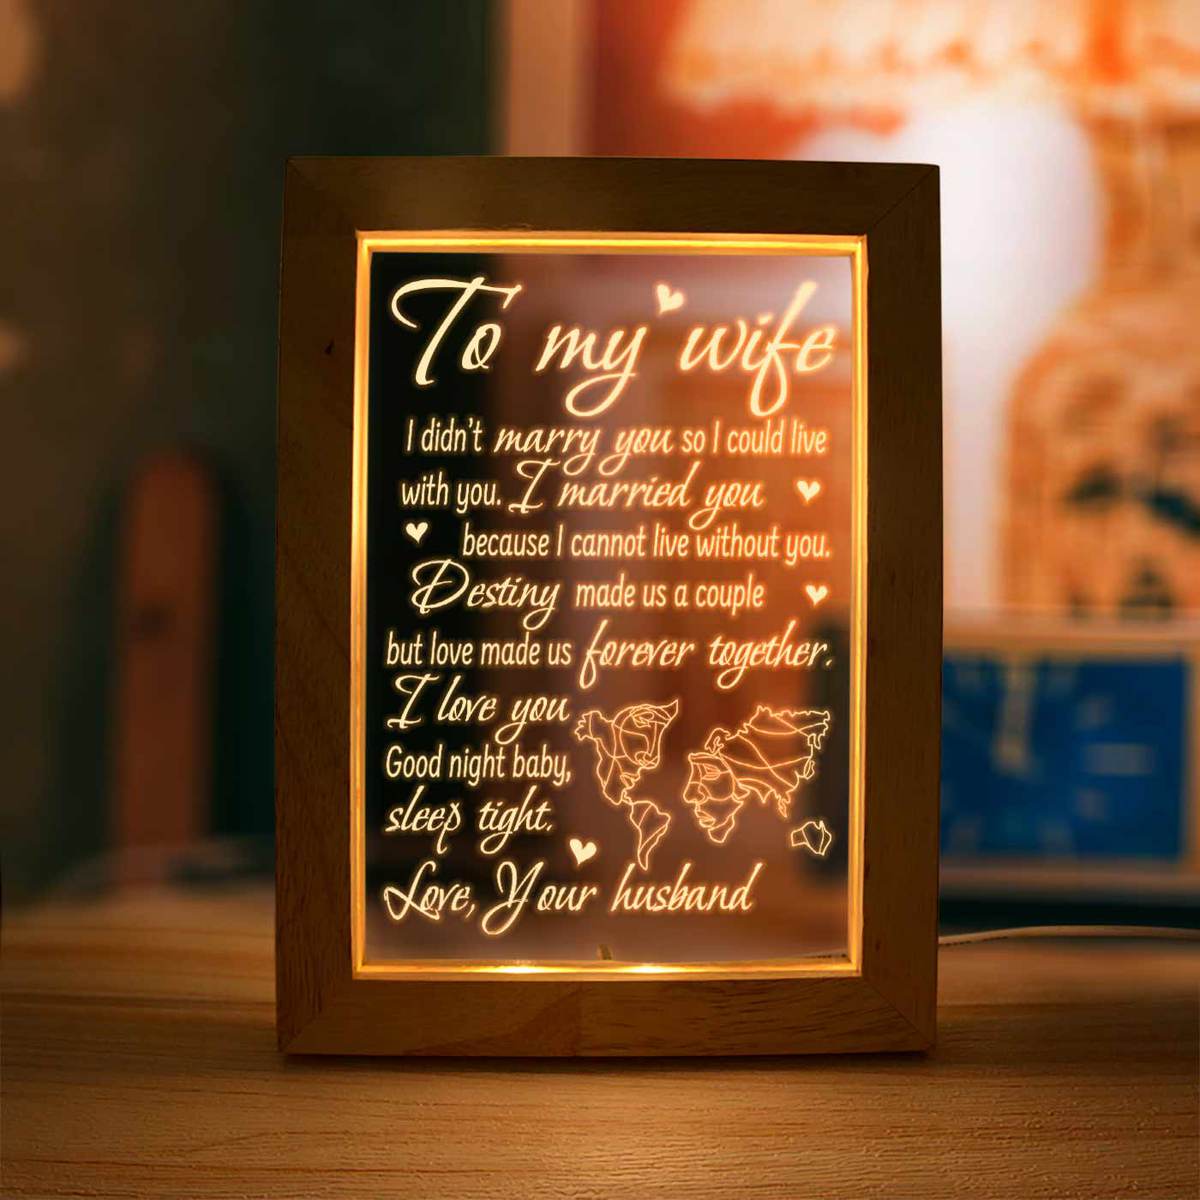 Good Night Baby - Led Frame - Engrave The Love